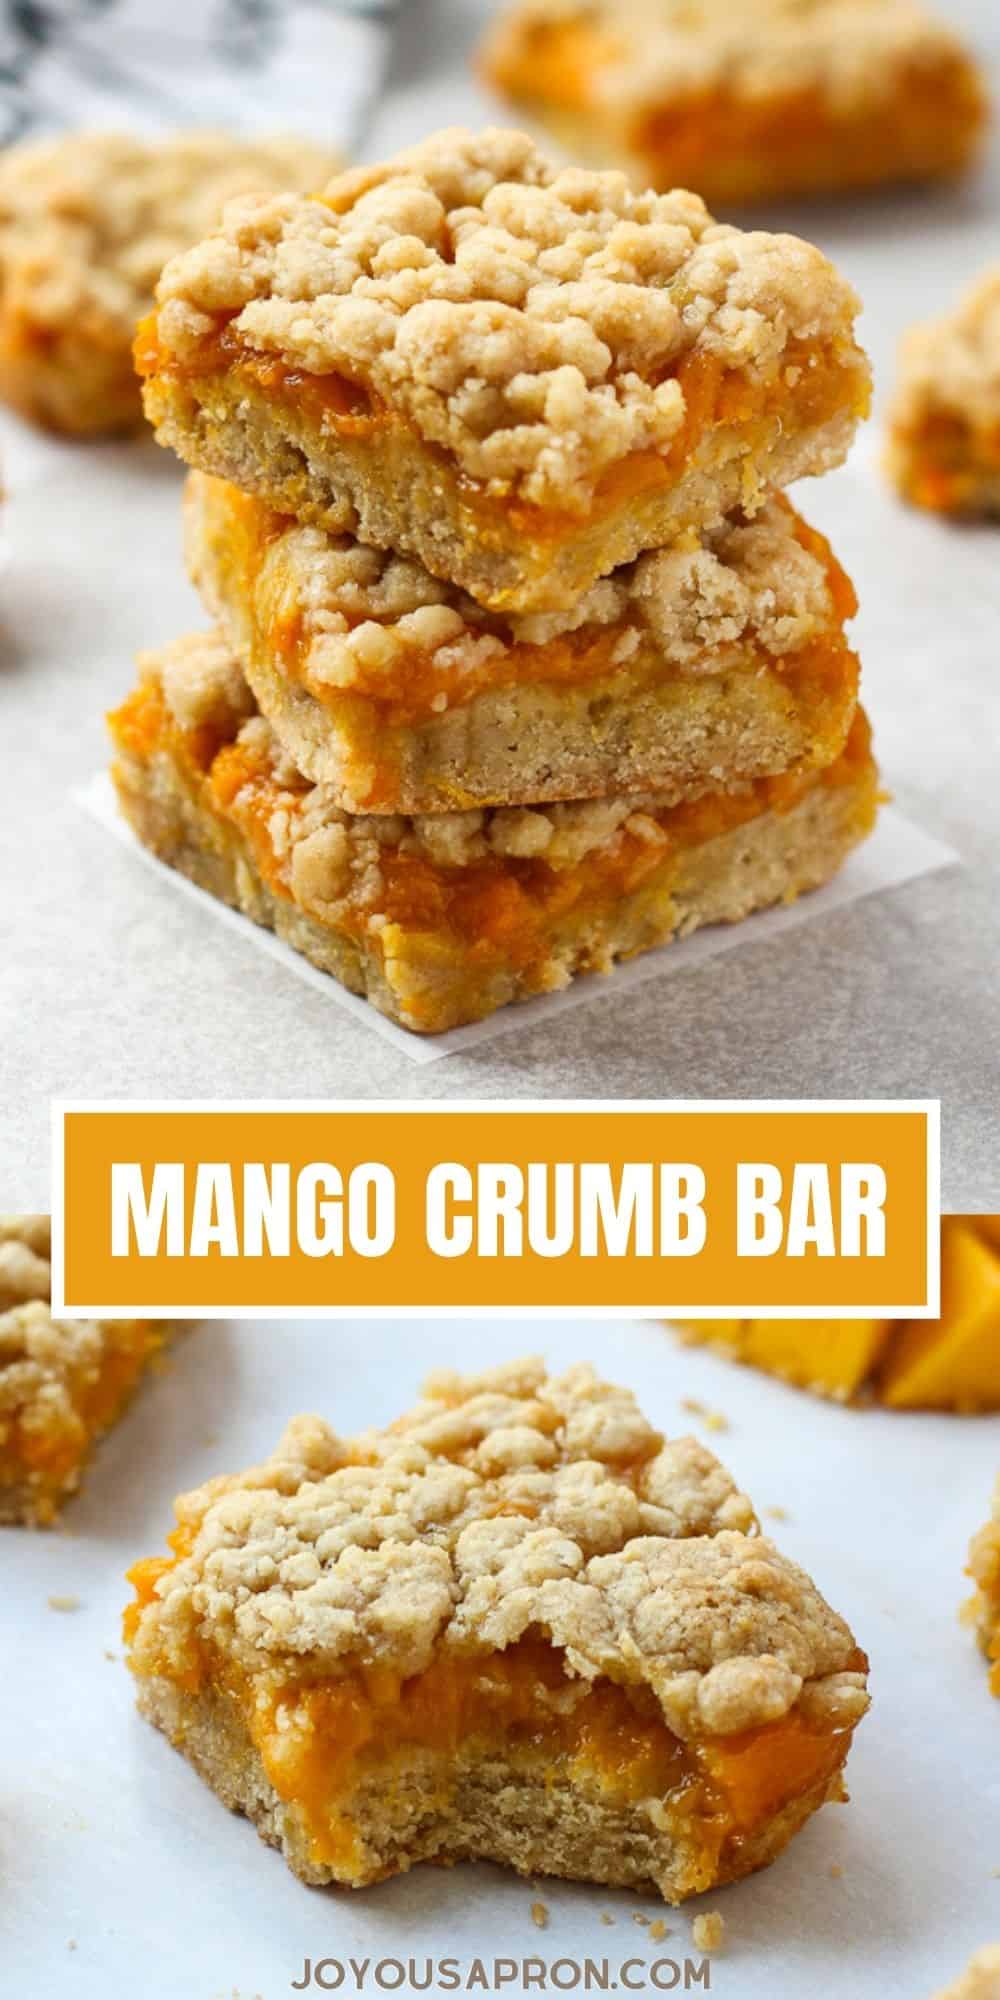 Mango Crumb Bars - Fresh, sweet, juicy mango dessert! Mango mixture sandwiched between two layers of crumbly, buttery pastry. These fruity bars are the perfect summer dessert, snack, or breakfast! via @joyousapron